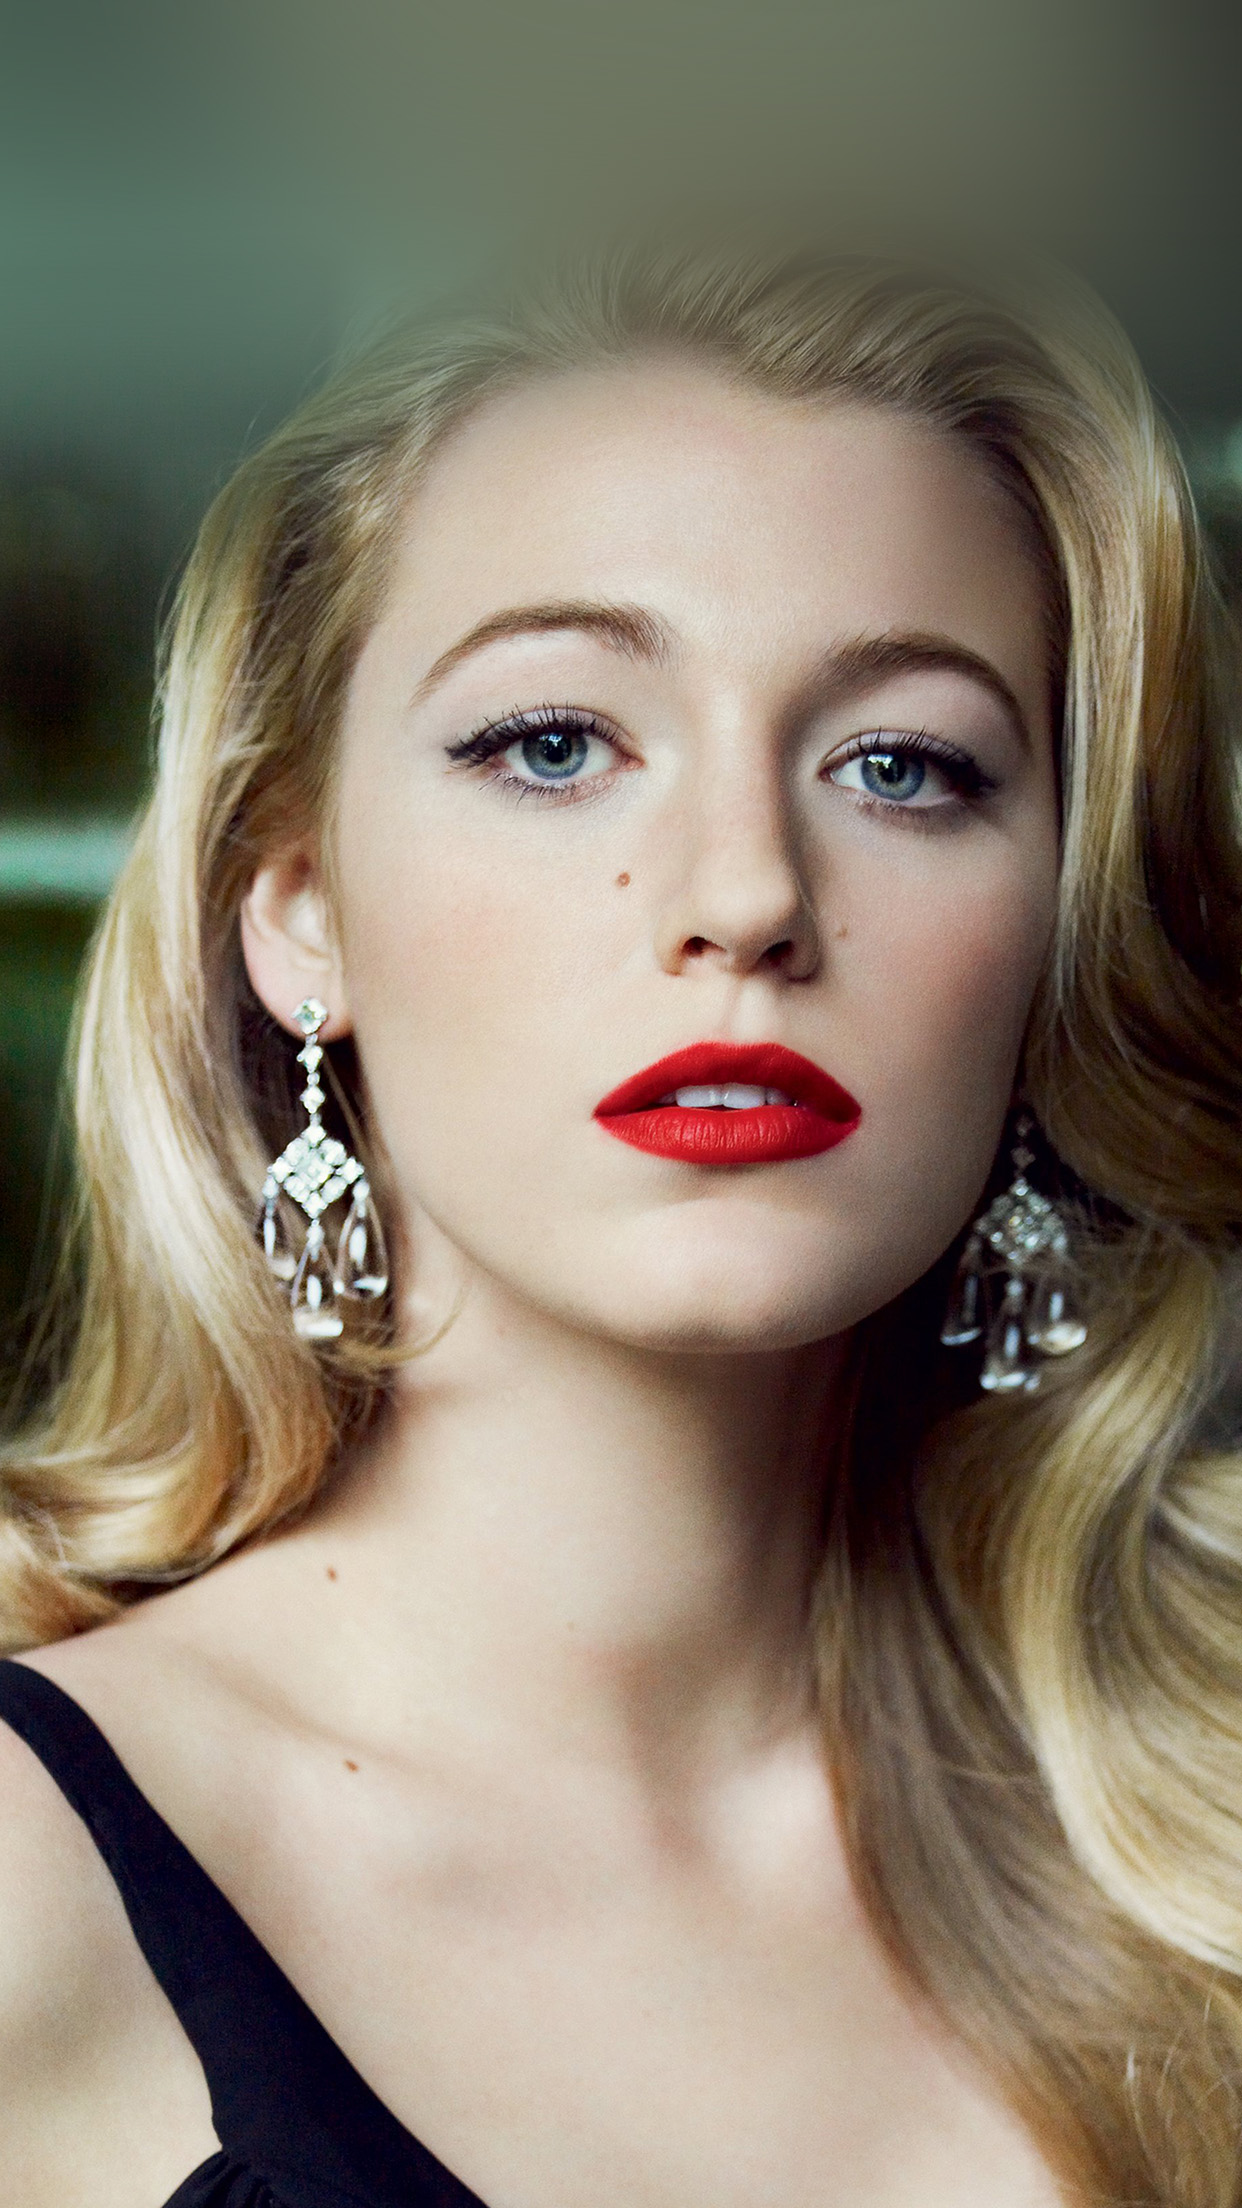 Blake Lively Face Film Beauty Android wallpaper